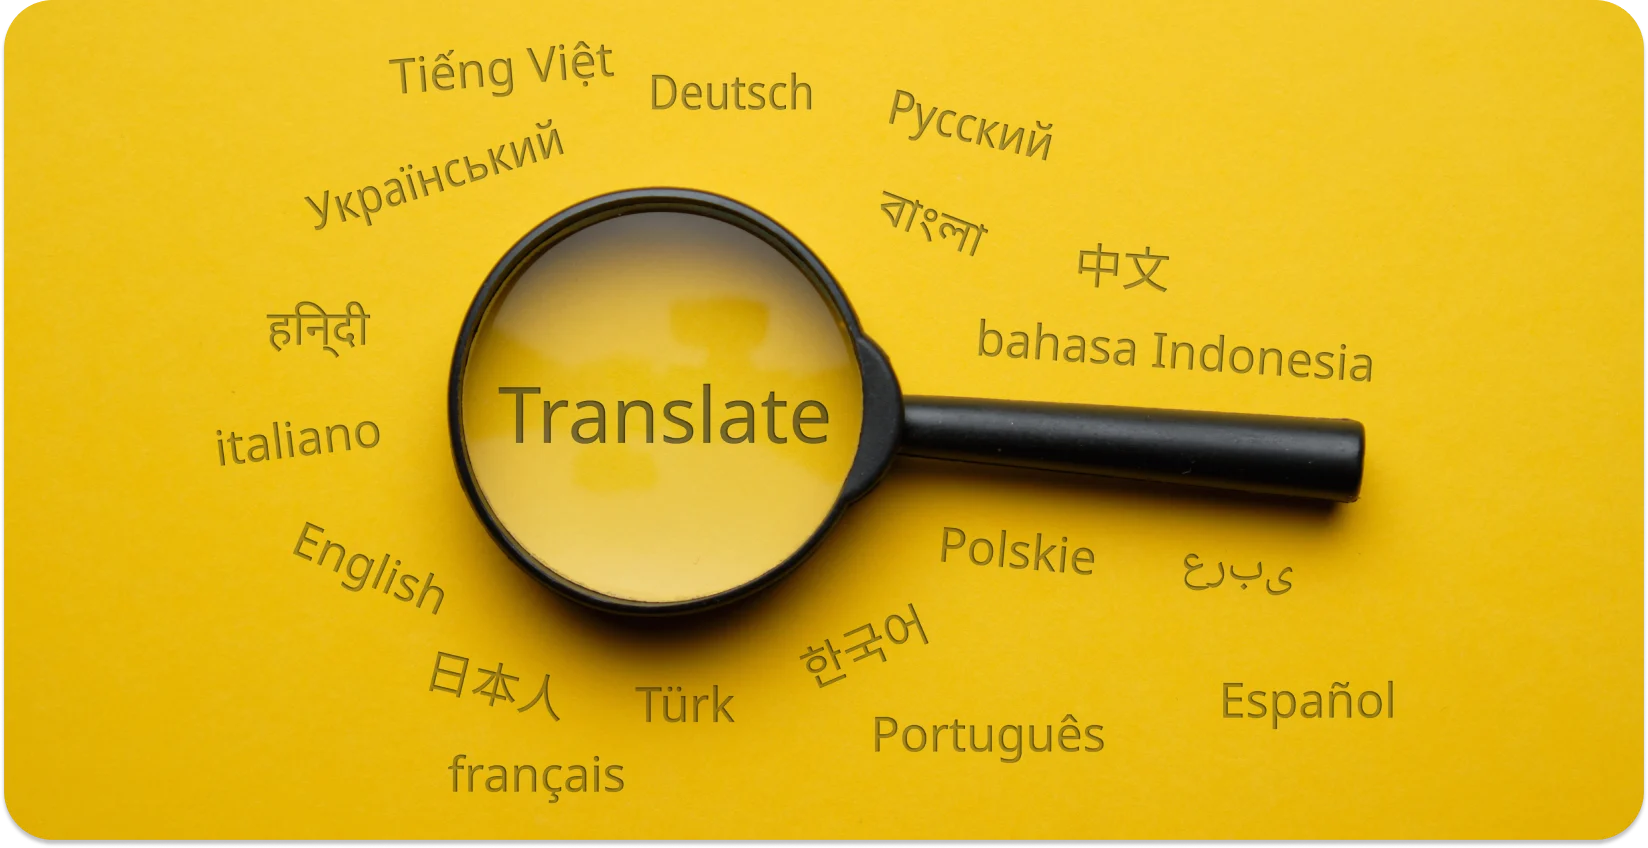 Magnifying glass highlighting 'Translate' amidst various languages, symbolizing linguistic conversion.